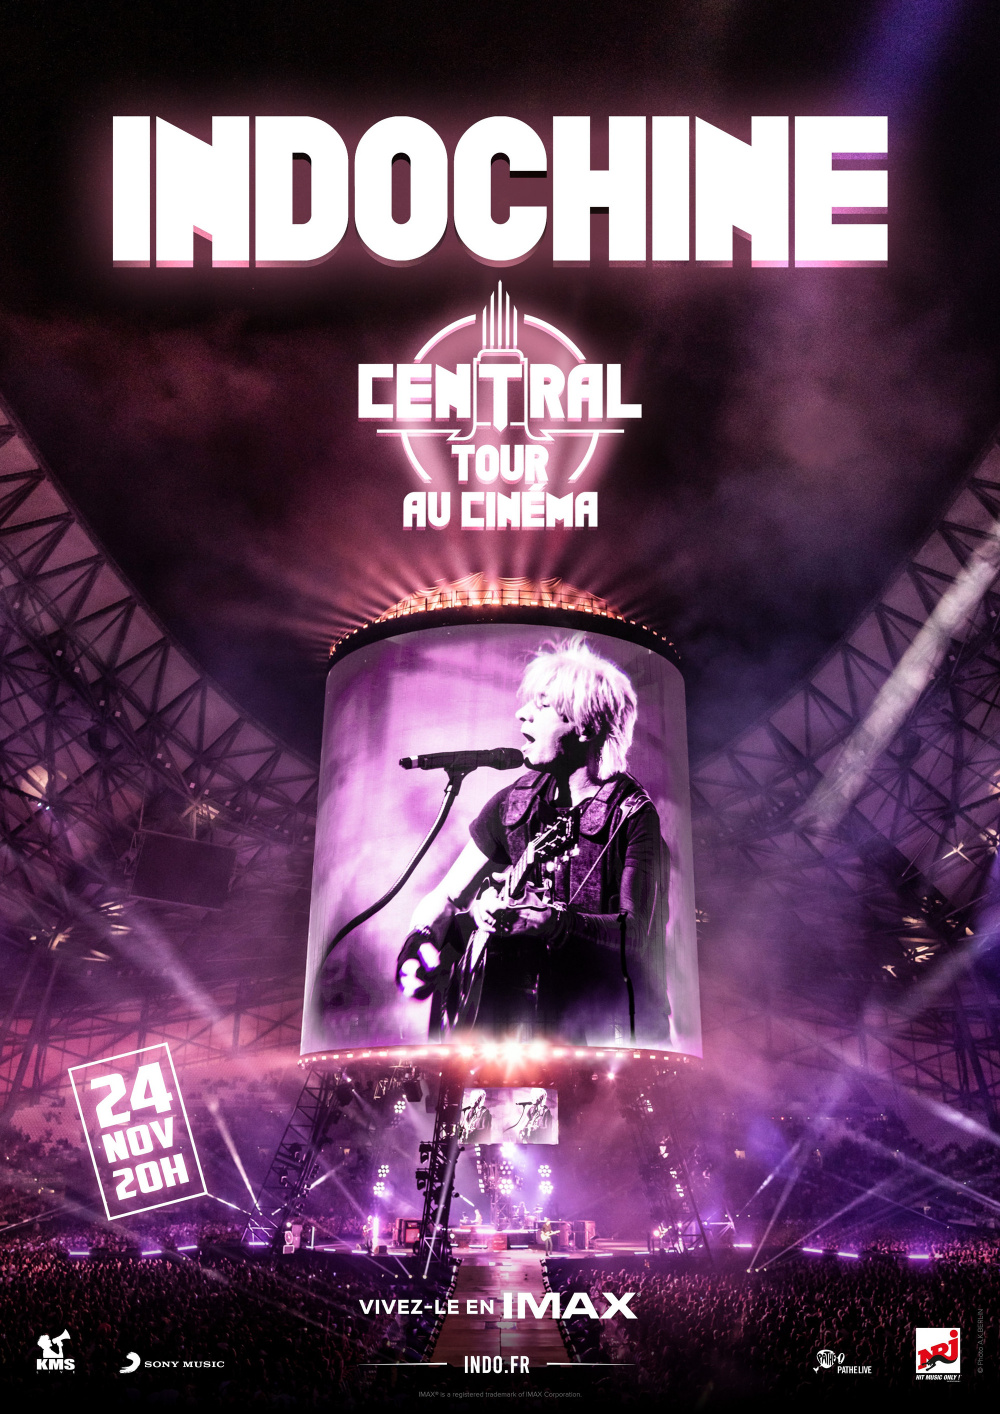 indochine central tour replay